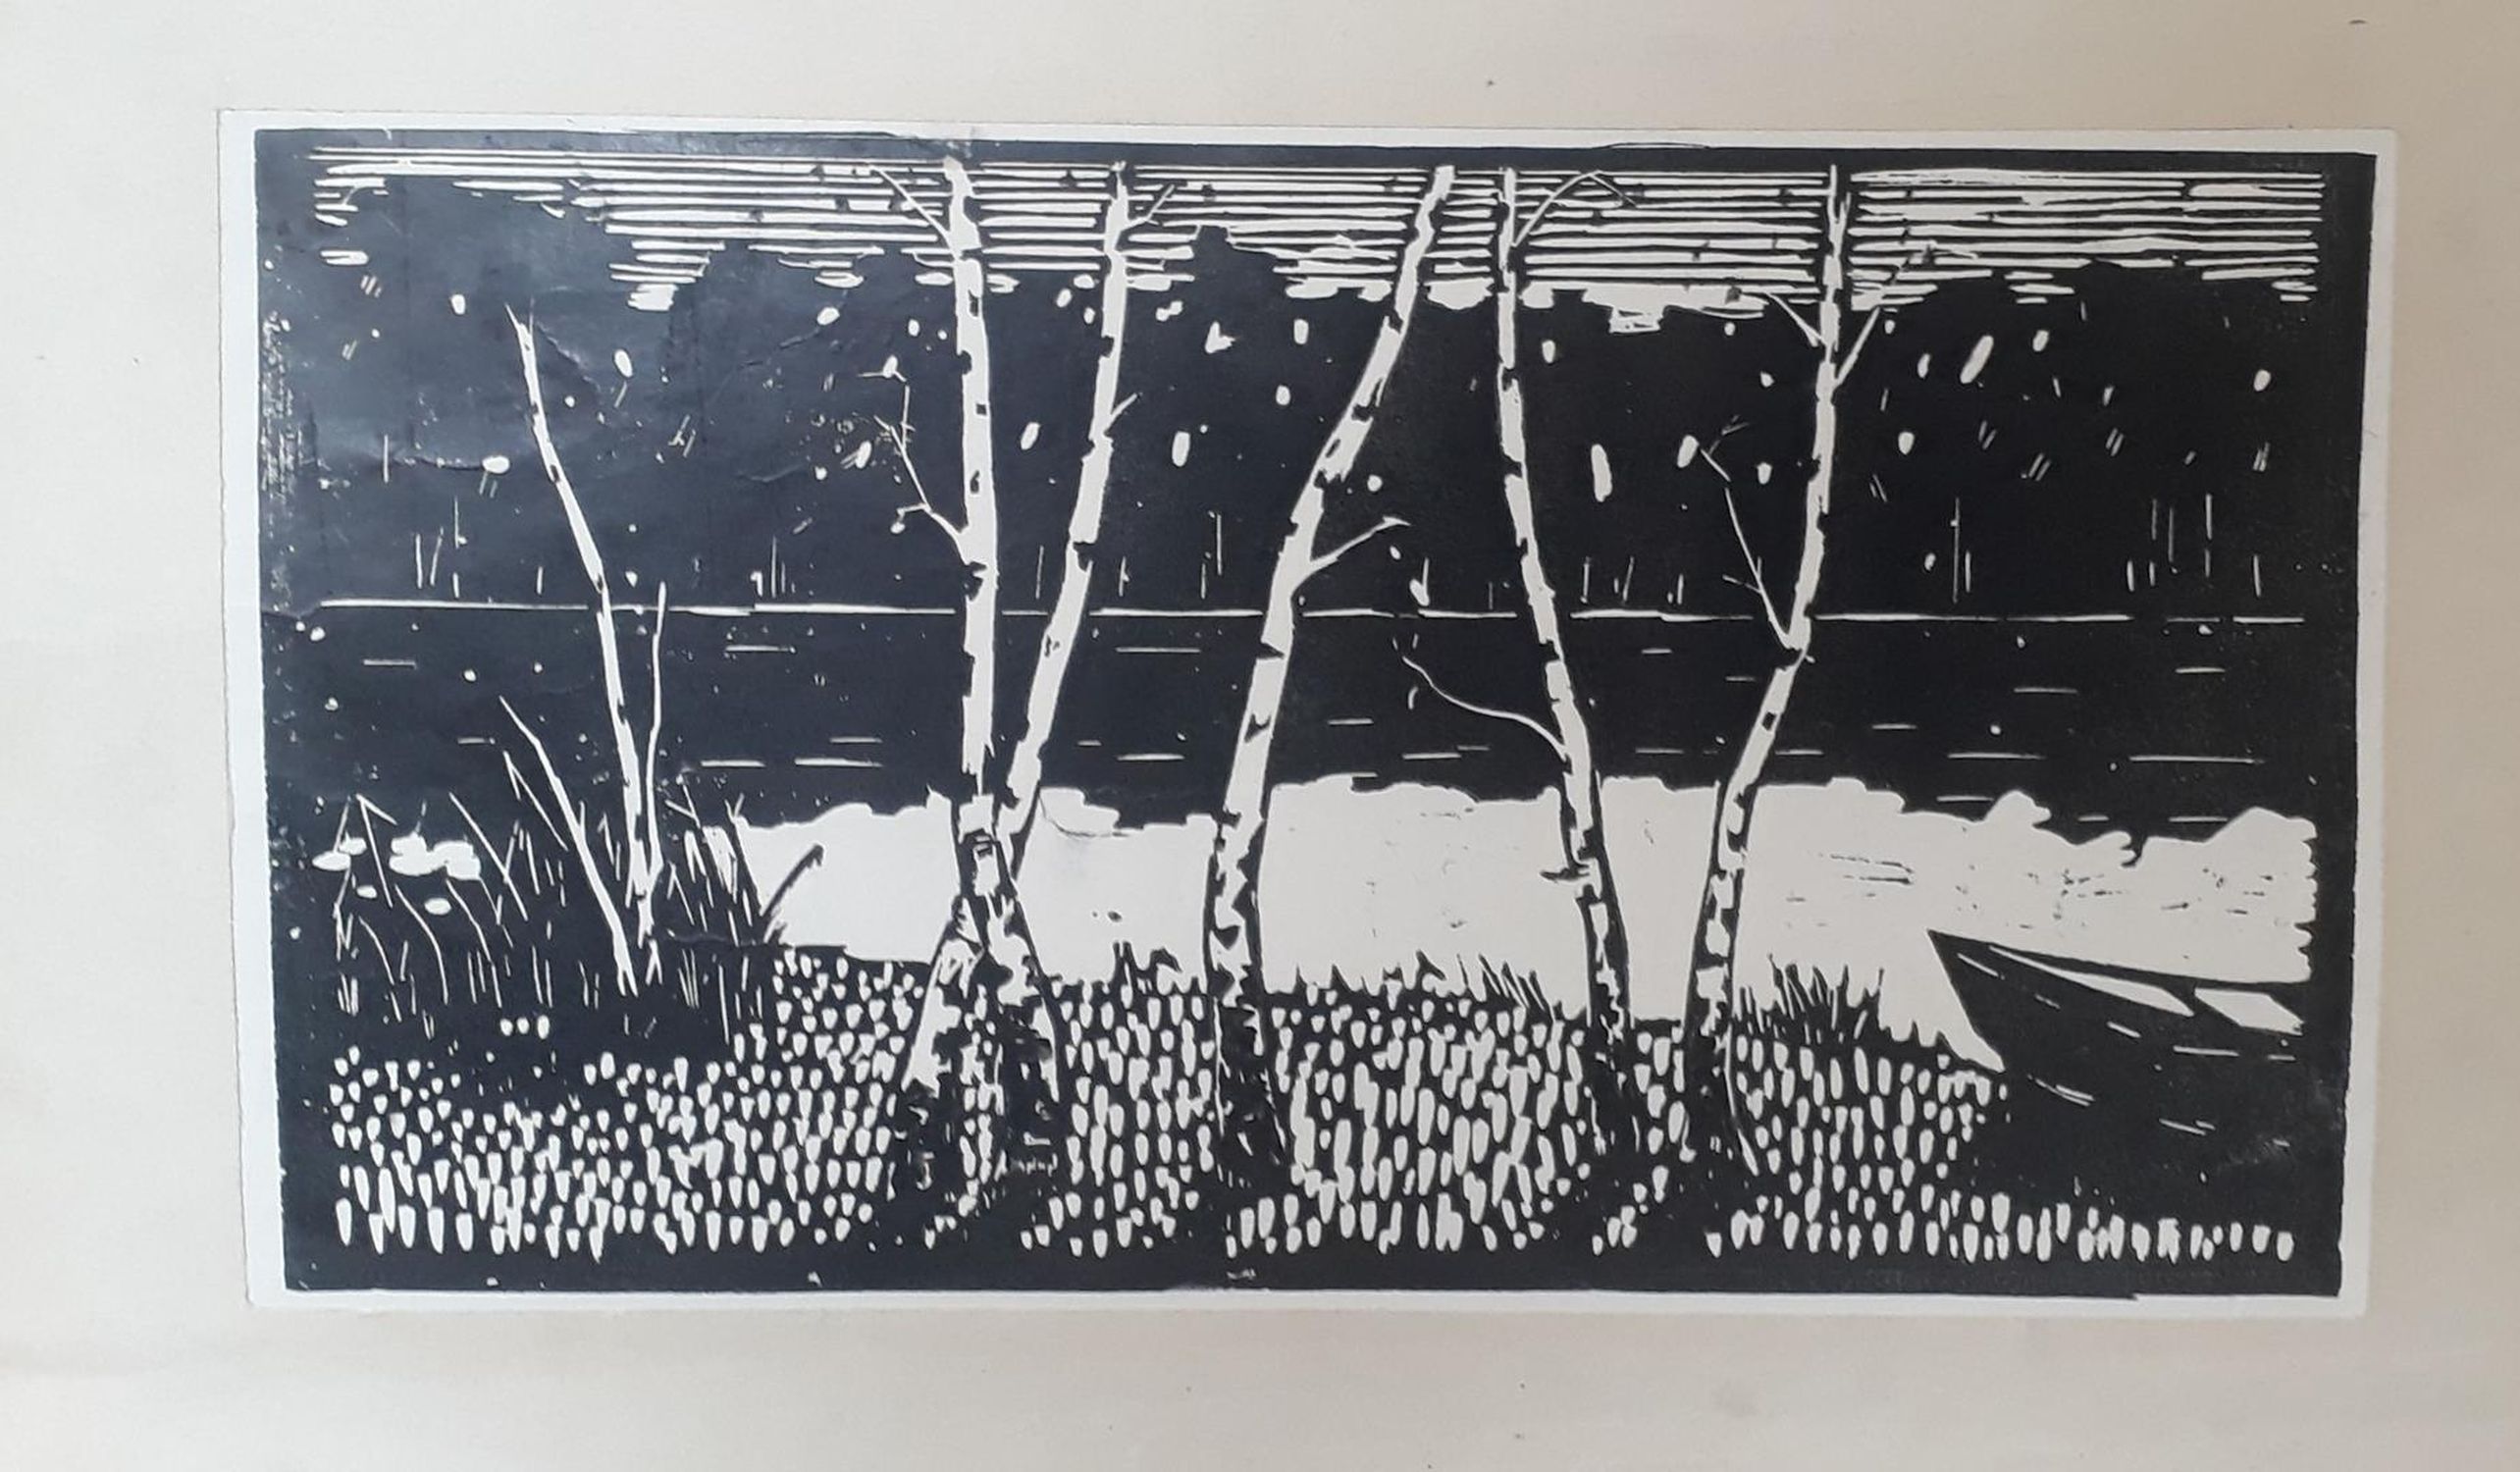 "Birches on the banks of the river"